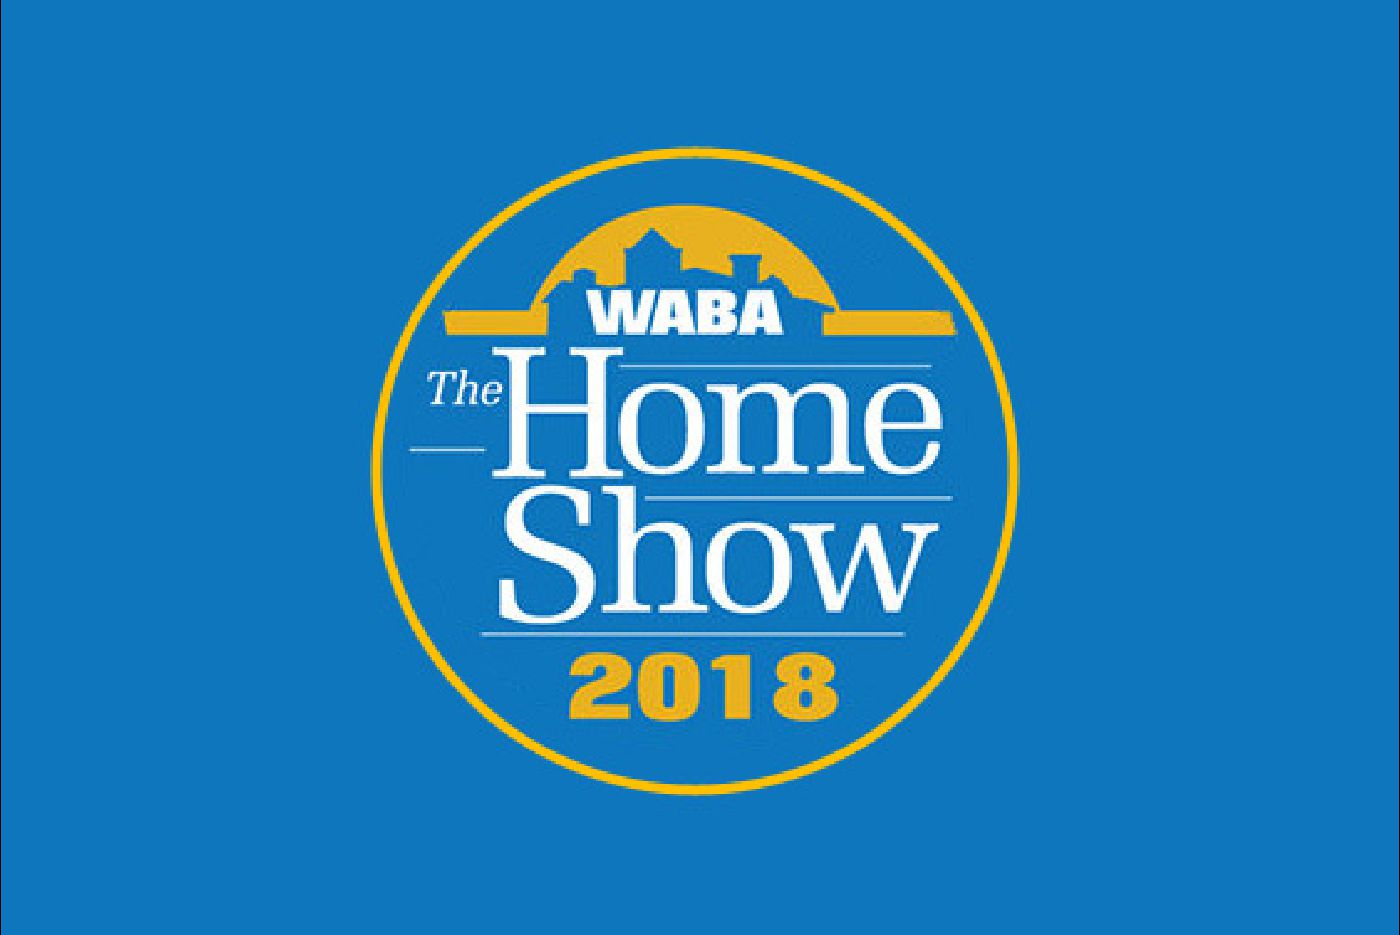 Meet the iron door project at the WABA 2018 Home Show